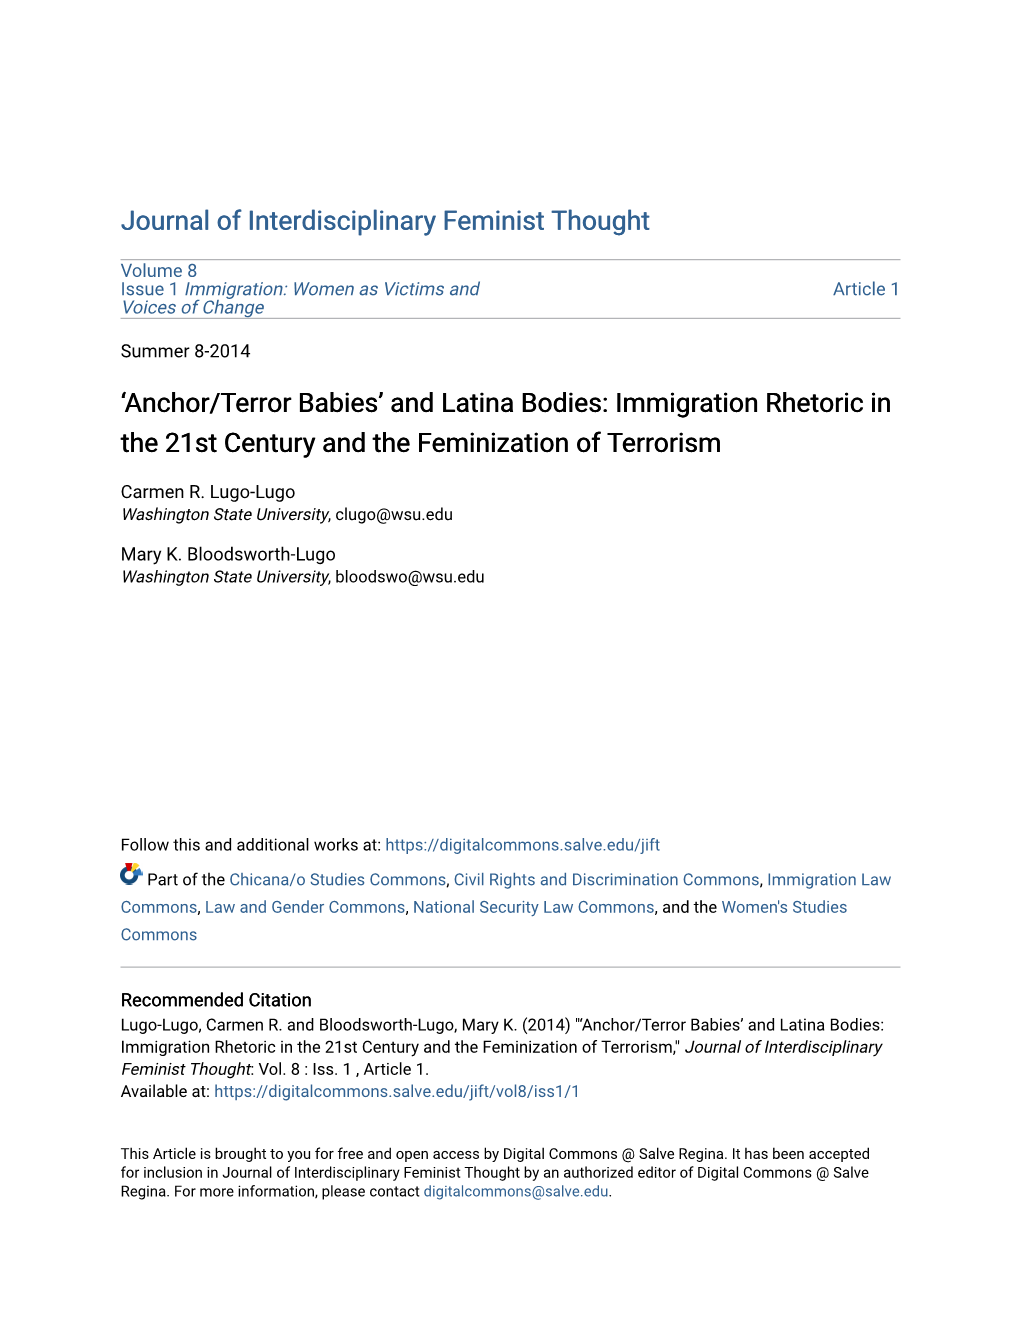 And Latina Bodies: Immigration Rhetoric in the 21St Century and the Feminization of Terrorism